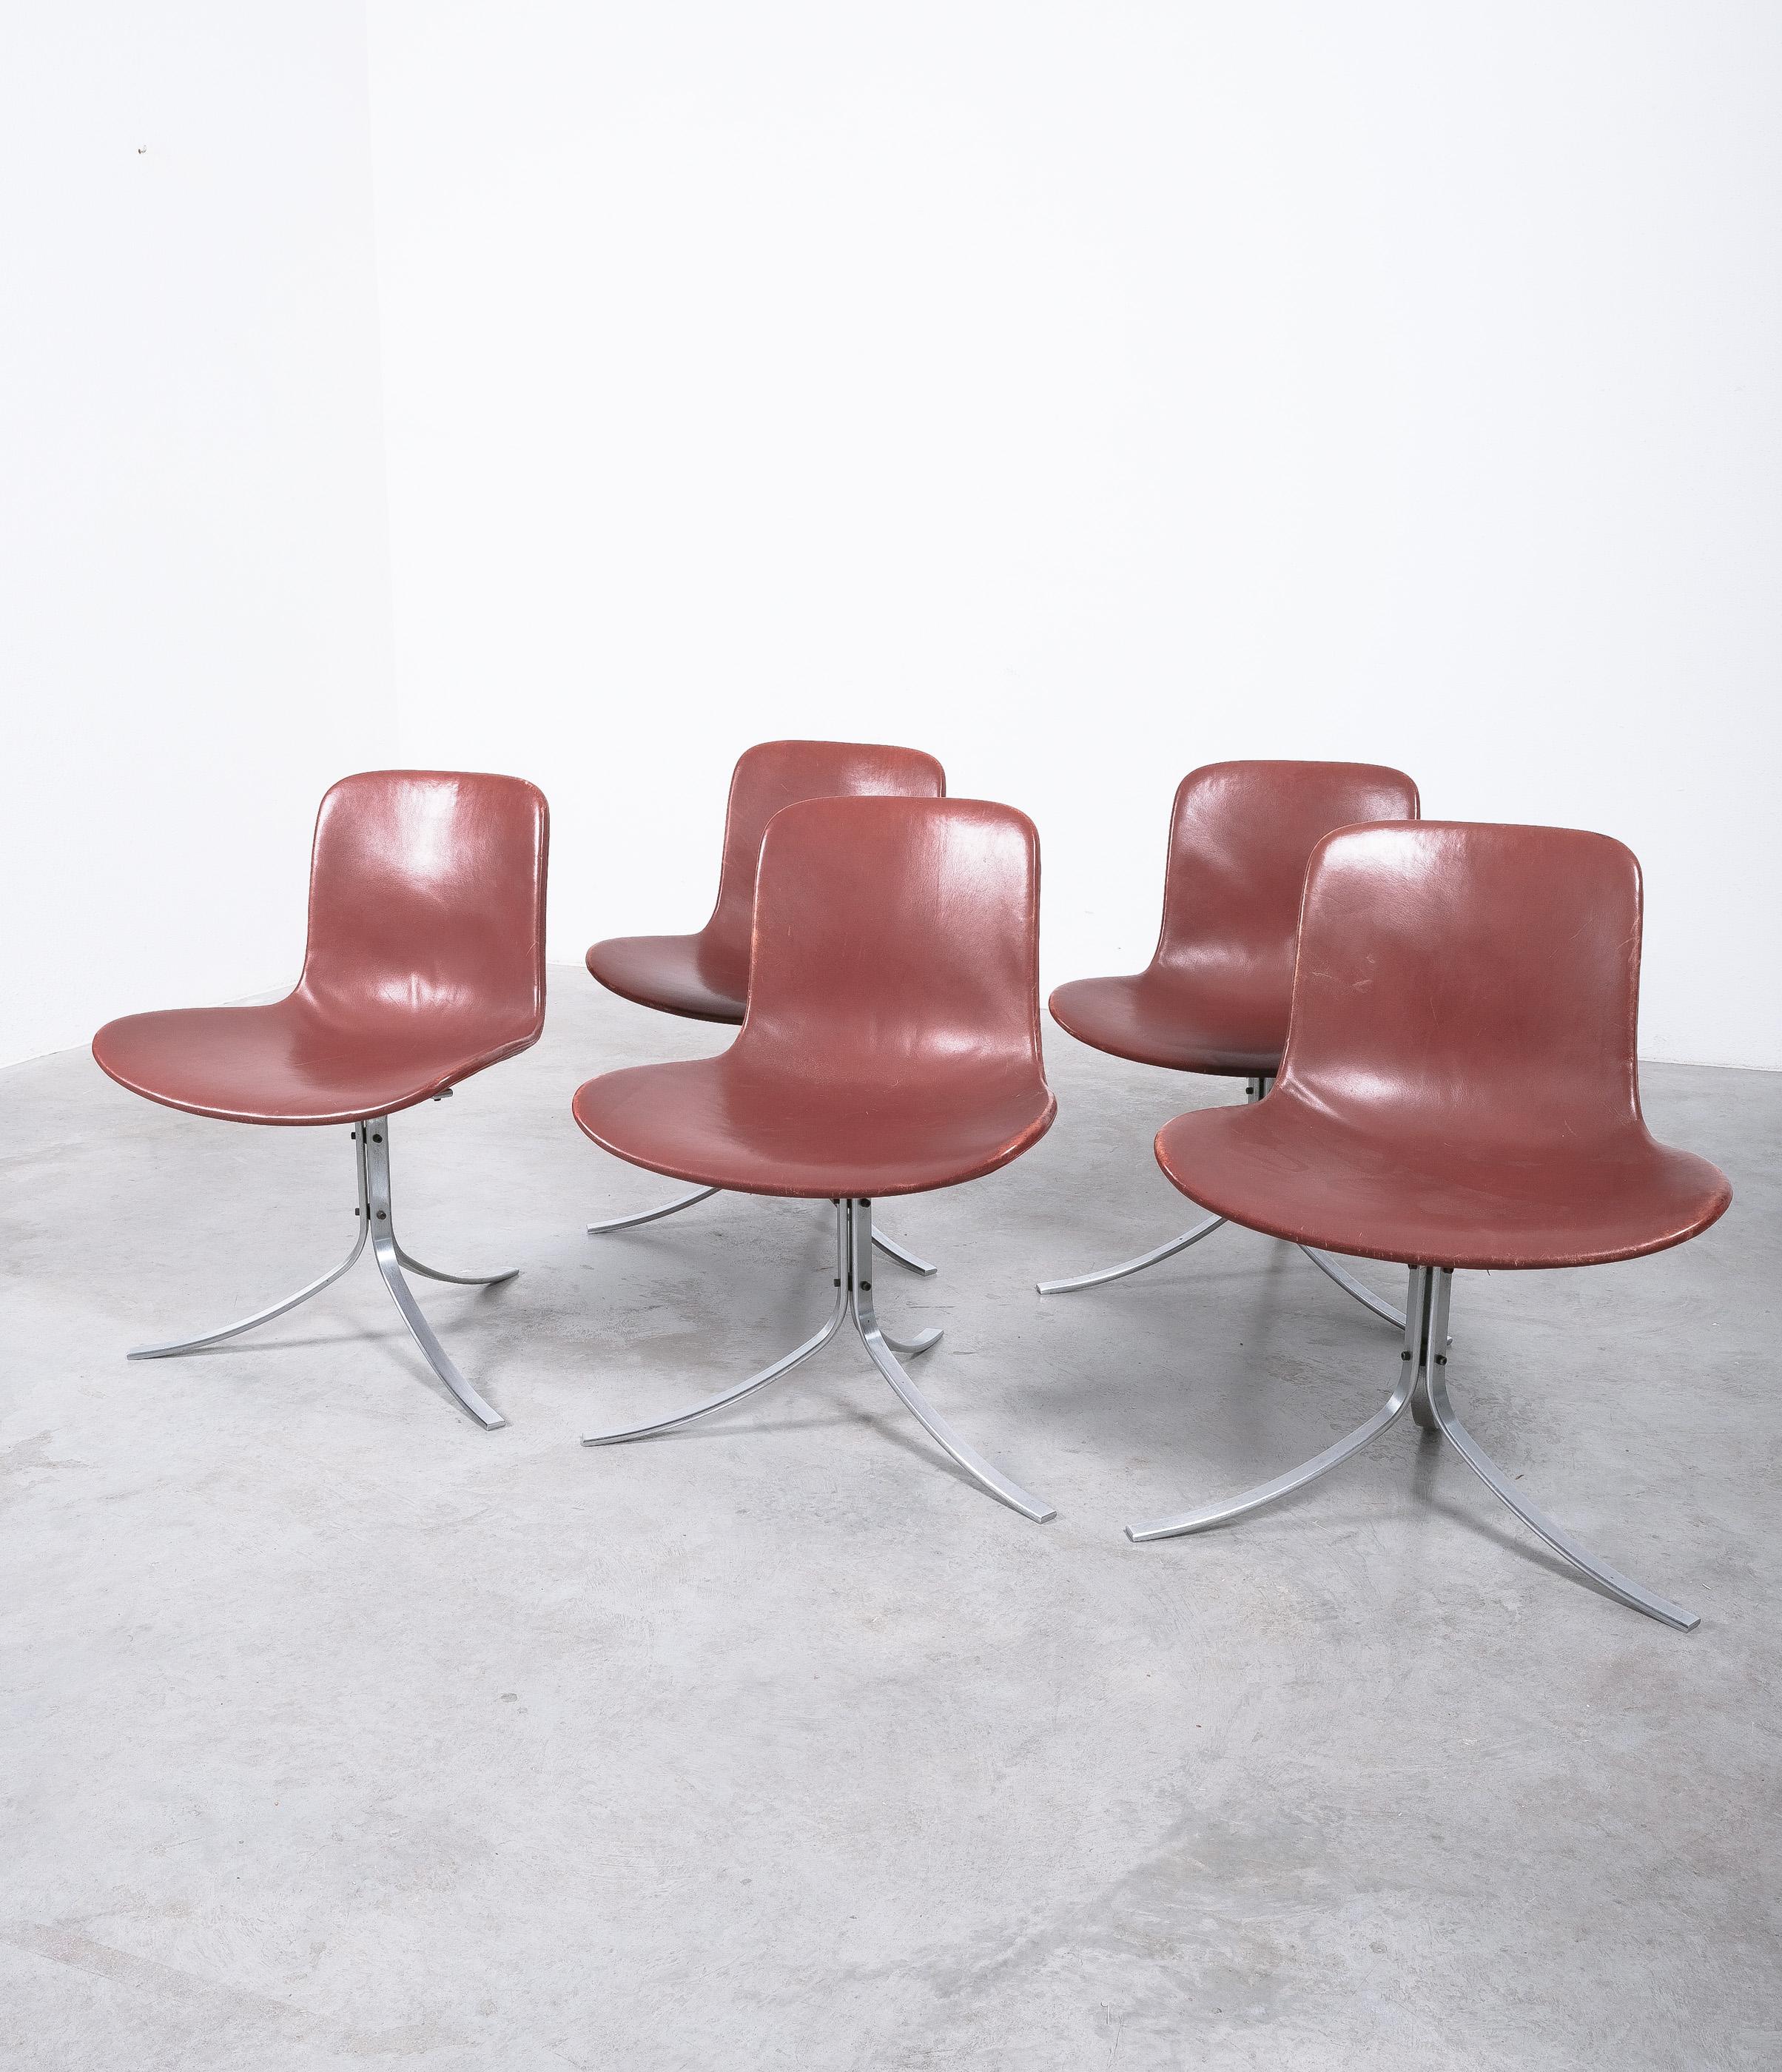 A set of five early original 1960's PK9 chairs for E. Kold Christensen (marked), produced circa 1960-1970- in very good condition.

Amazing set of early sculptural classic chairs from Poul Kjearholm in great condition, makers mark in the base as